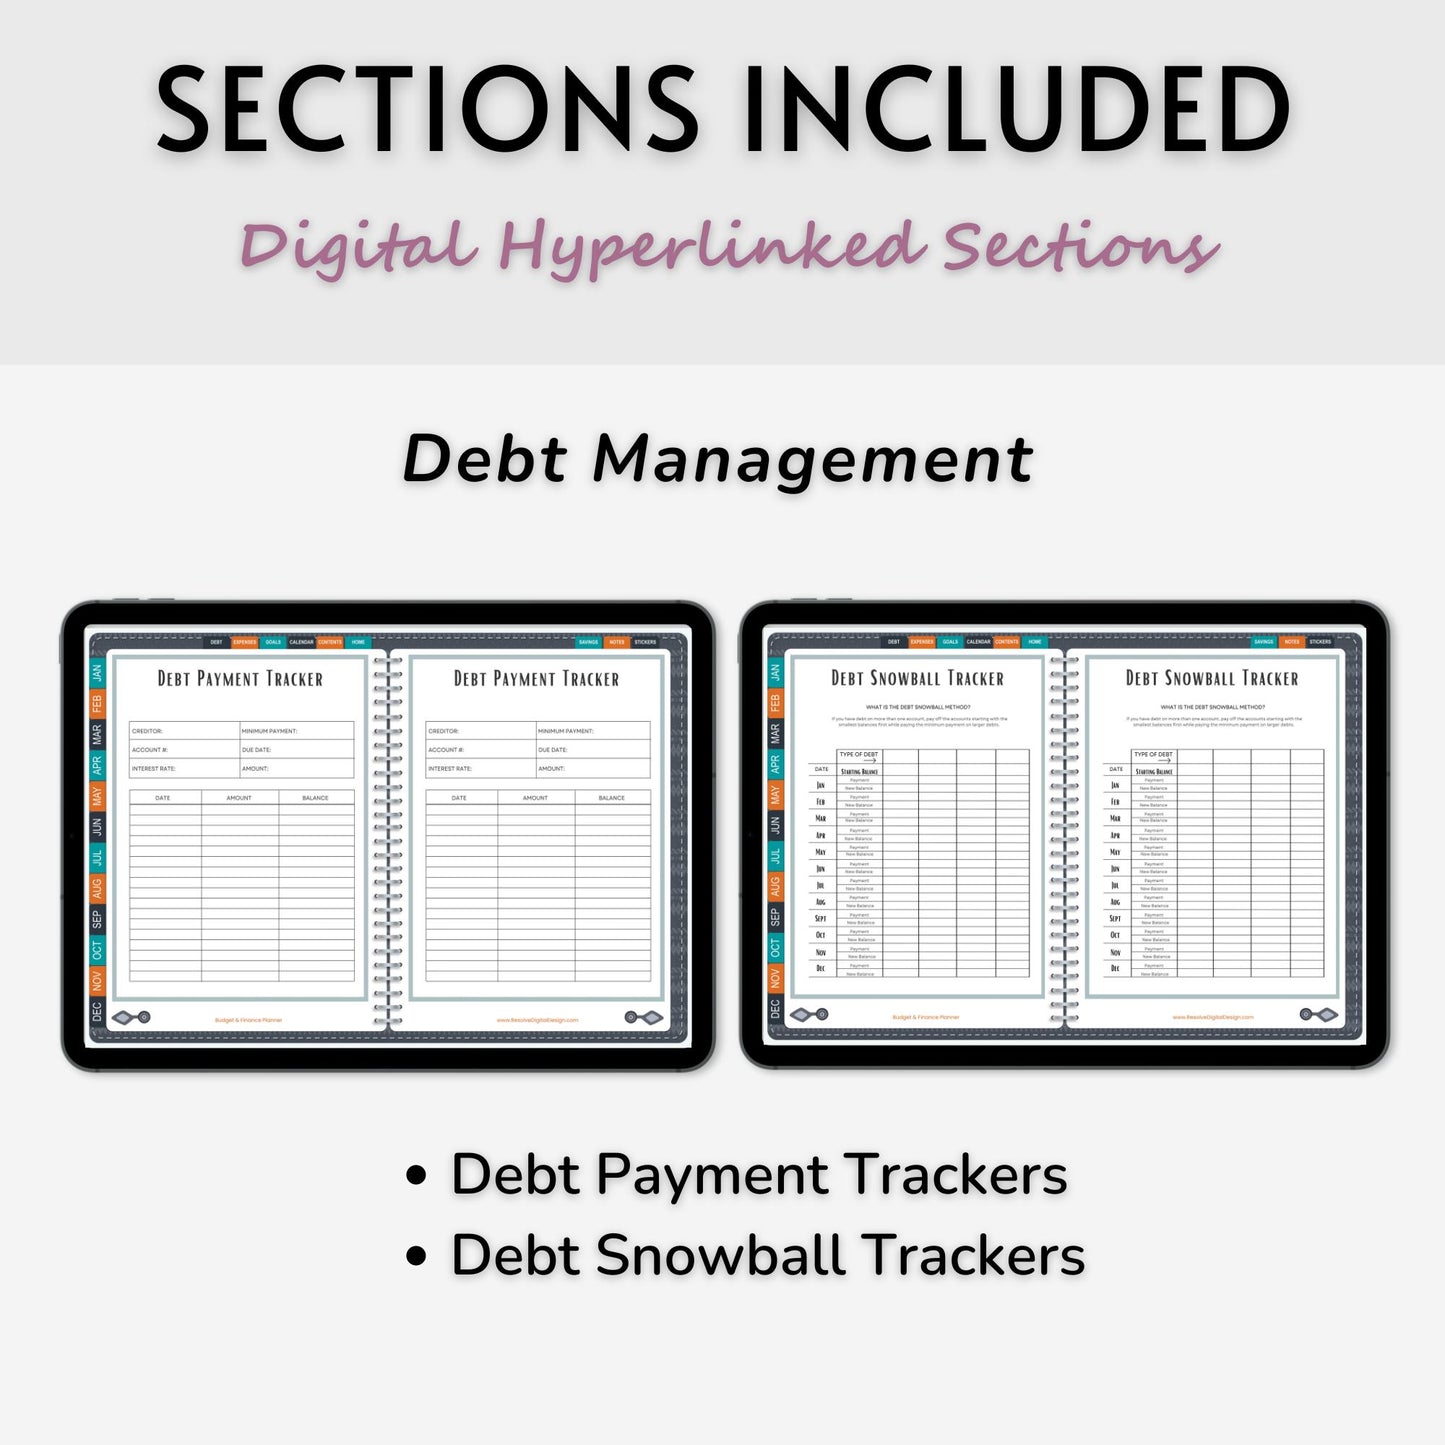 Digital Budget Planner and Tracker